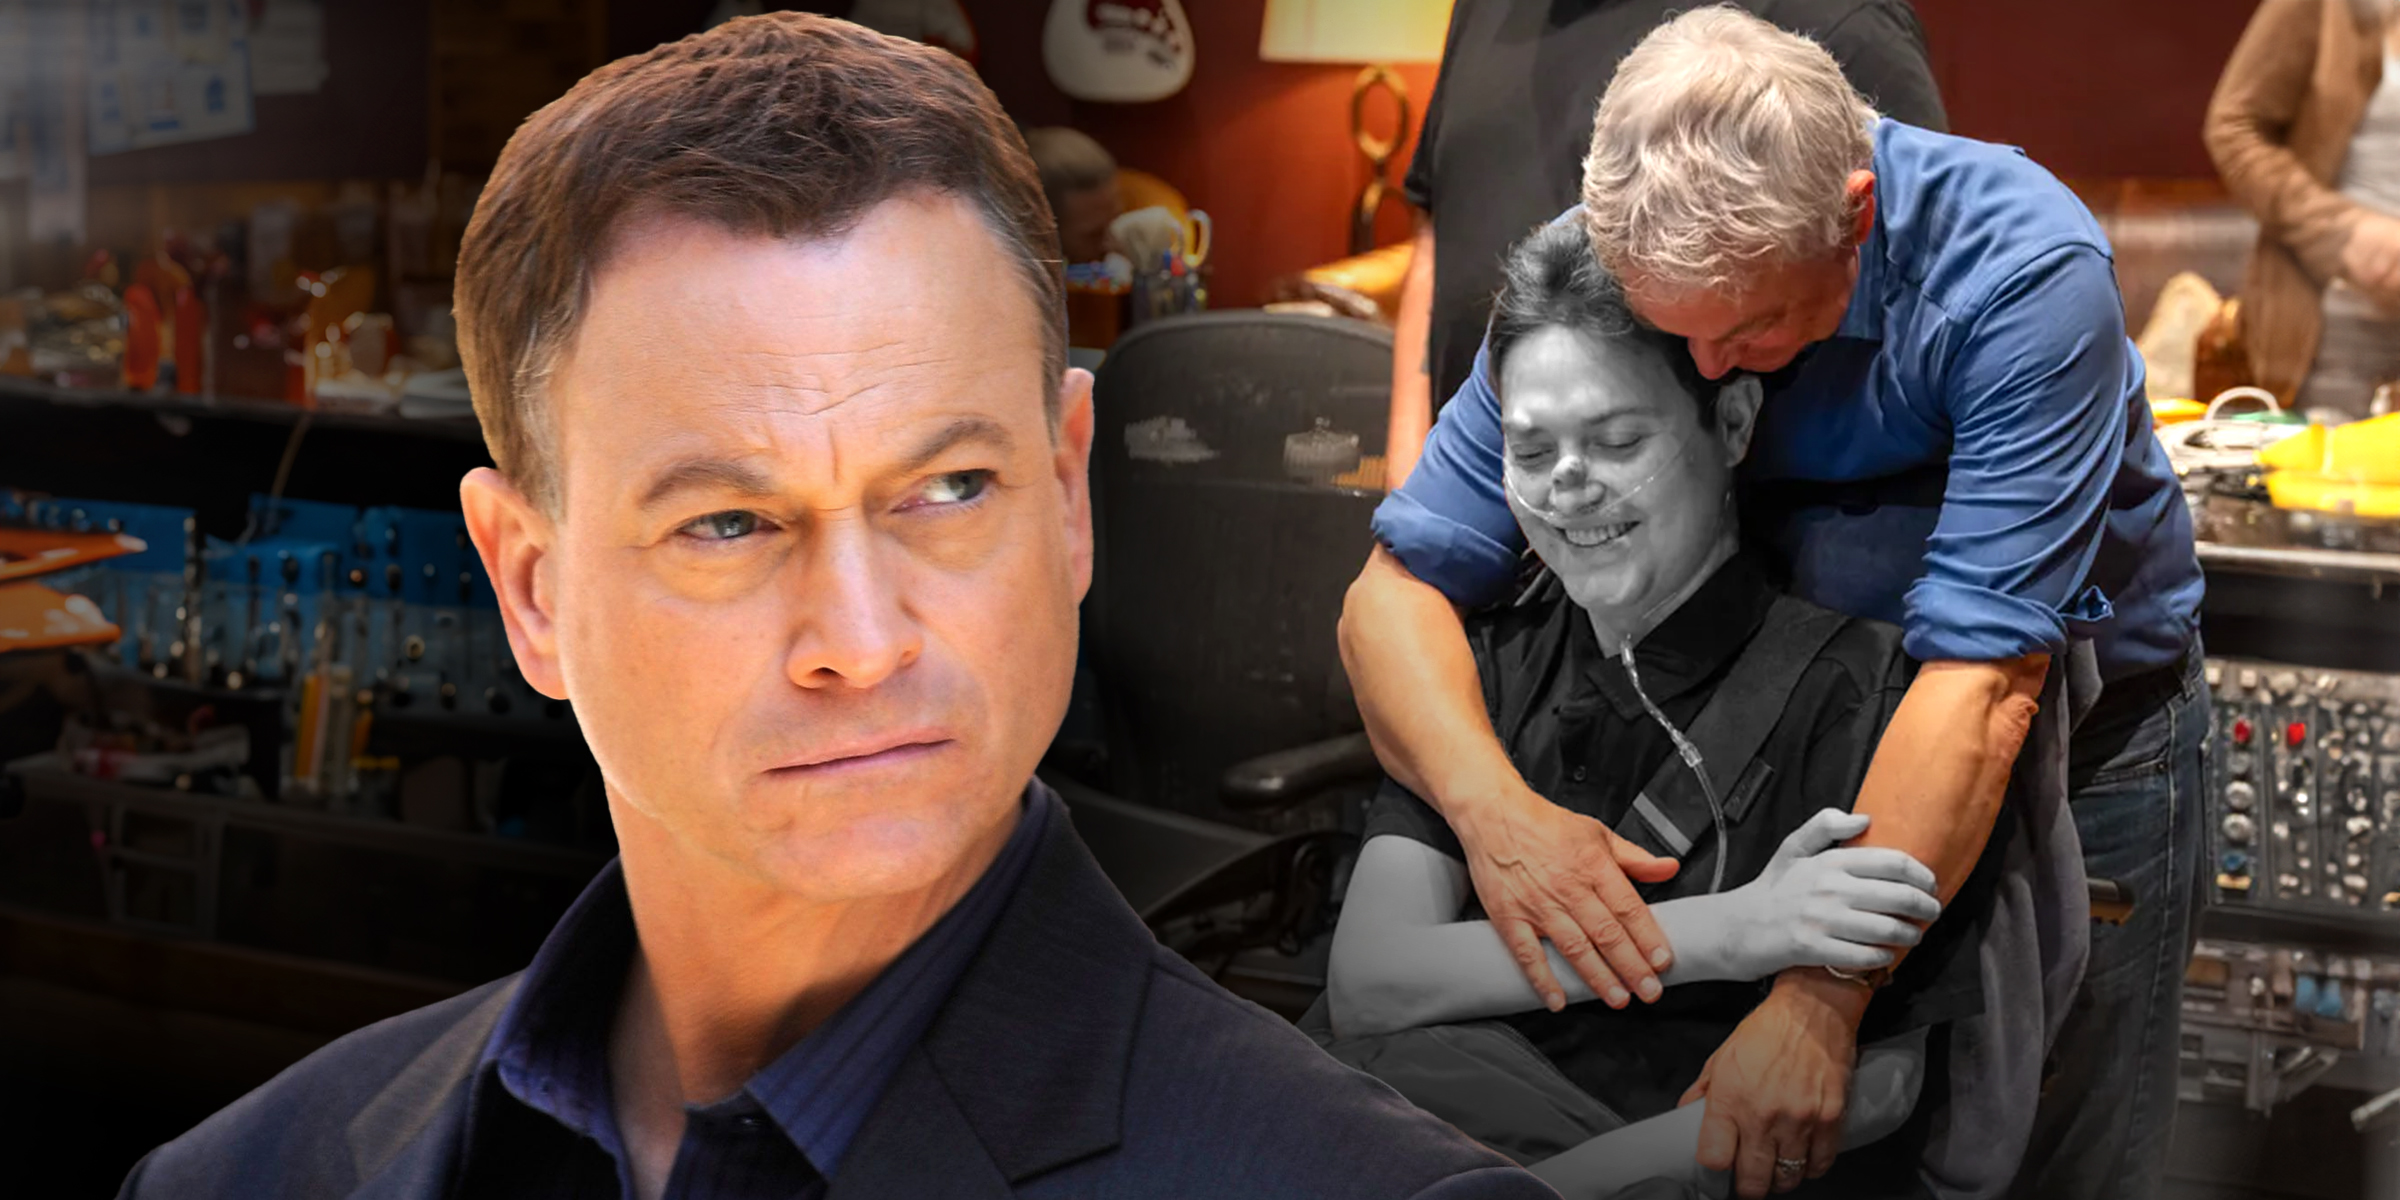 Gary Sinise | Gary et Mac Sinise | Source : Getty Images | Twitter/PageSix